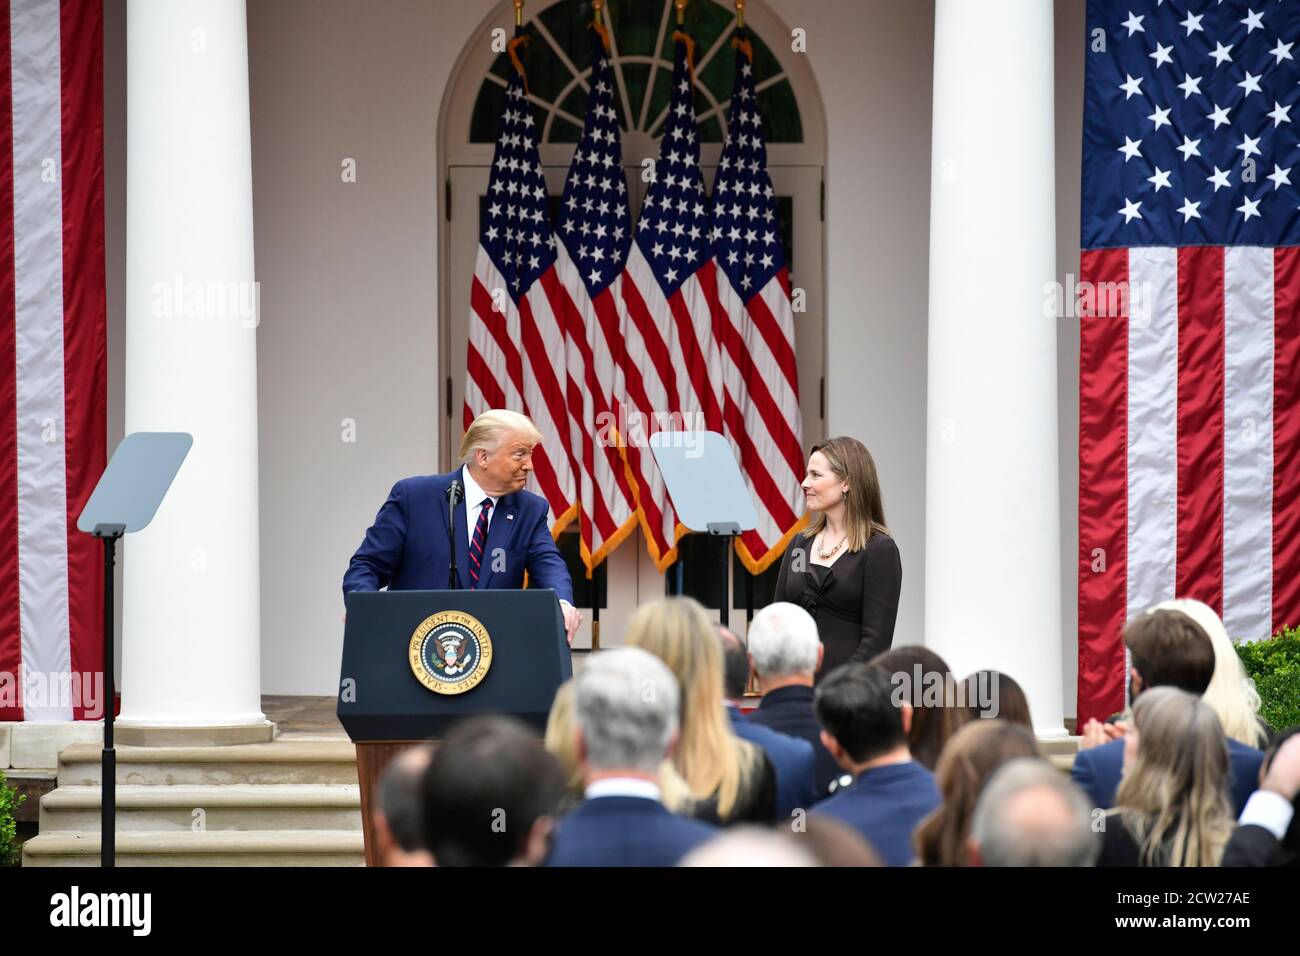 President Donald Trump announces Amy Coney Barrett, 48, as his nominee for Associate Justice of the Supreme Court of the United States during a ceremony in the Rose Garden at The White House in Washington, DC., Saturday, September 26, 2020.Credit: Rod Lamkey/Consolidated News Photos /MediaPunch Stock Photo